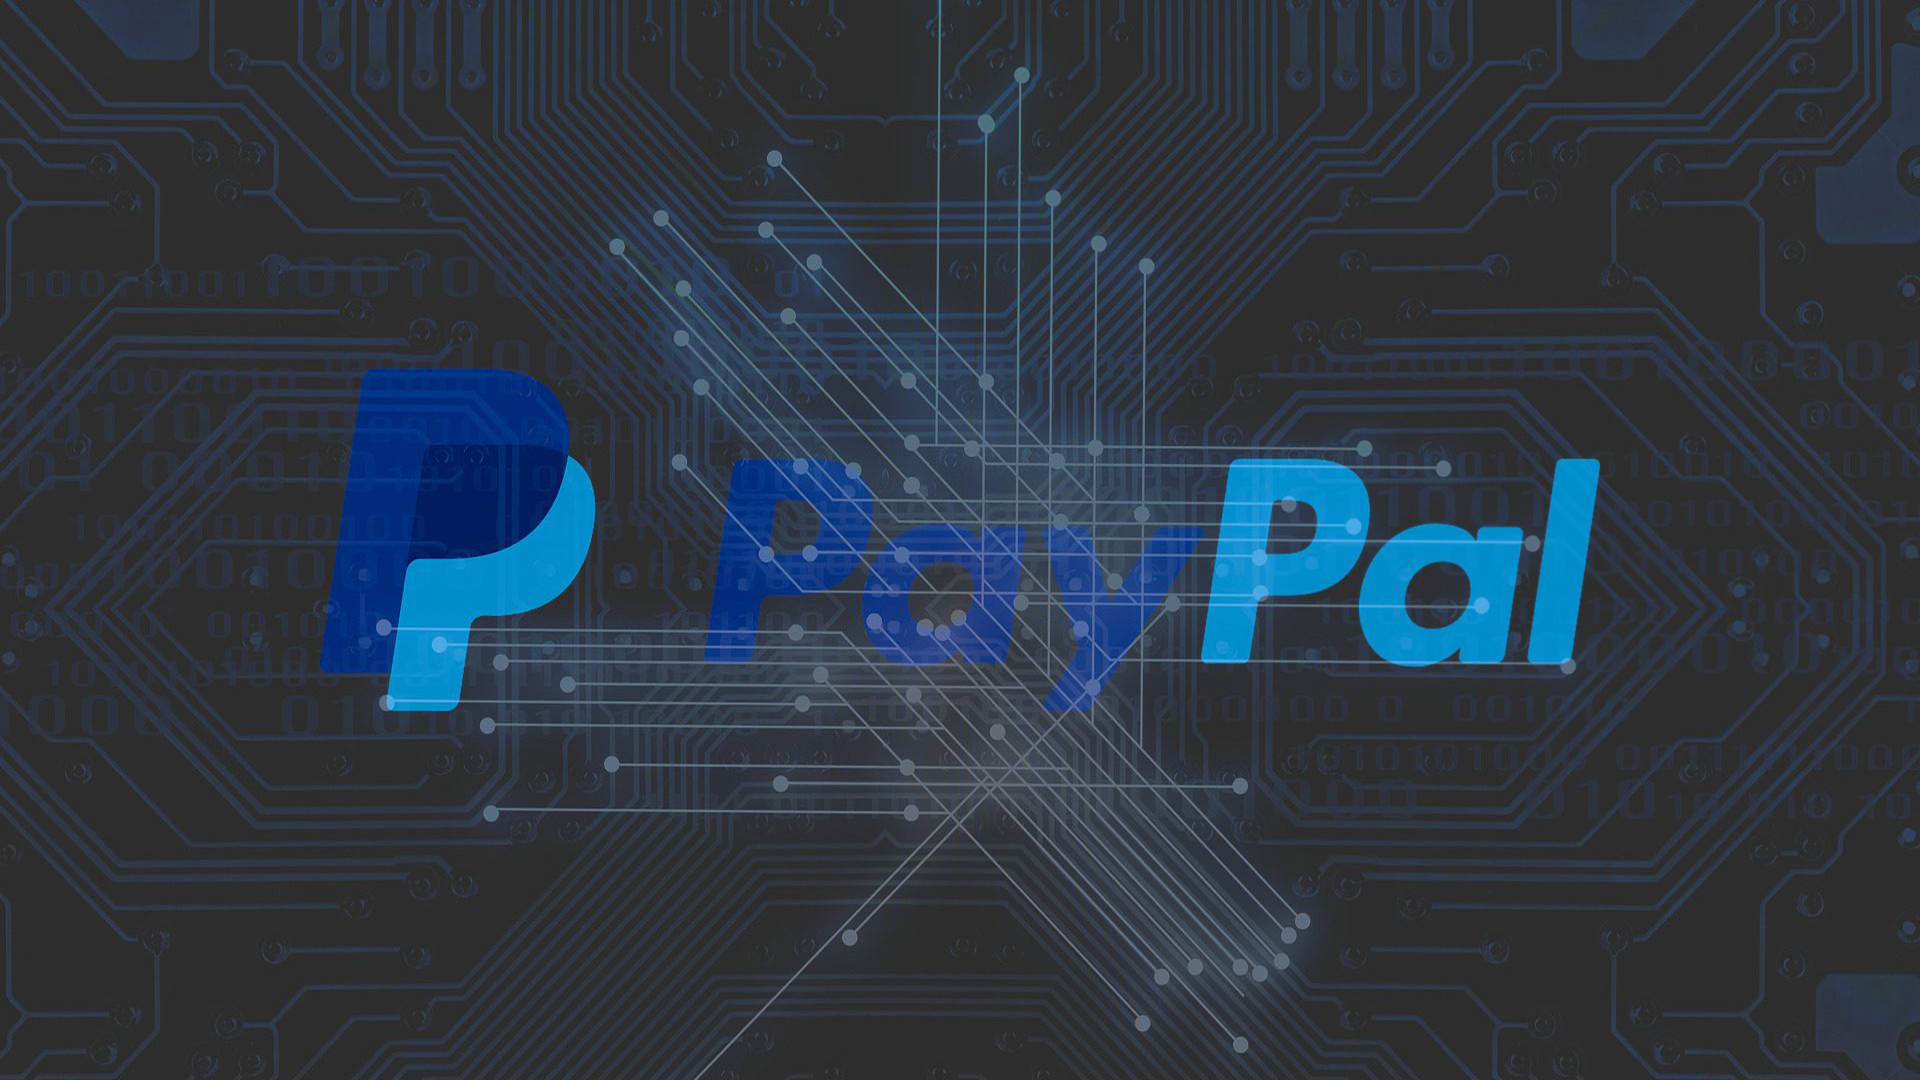 Paypal Logo With Circuitry Wallpaper